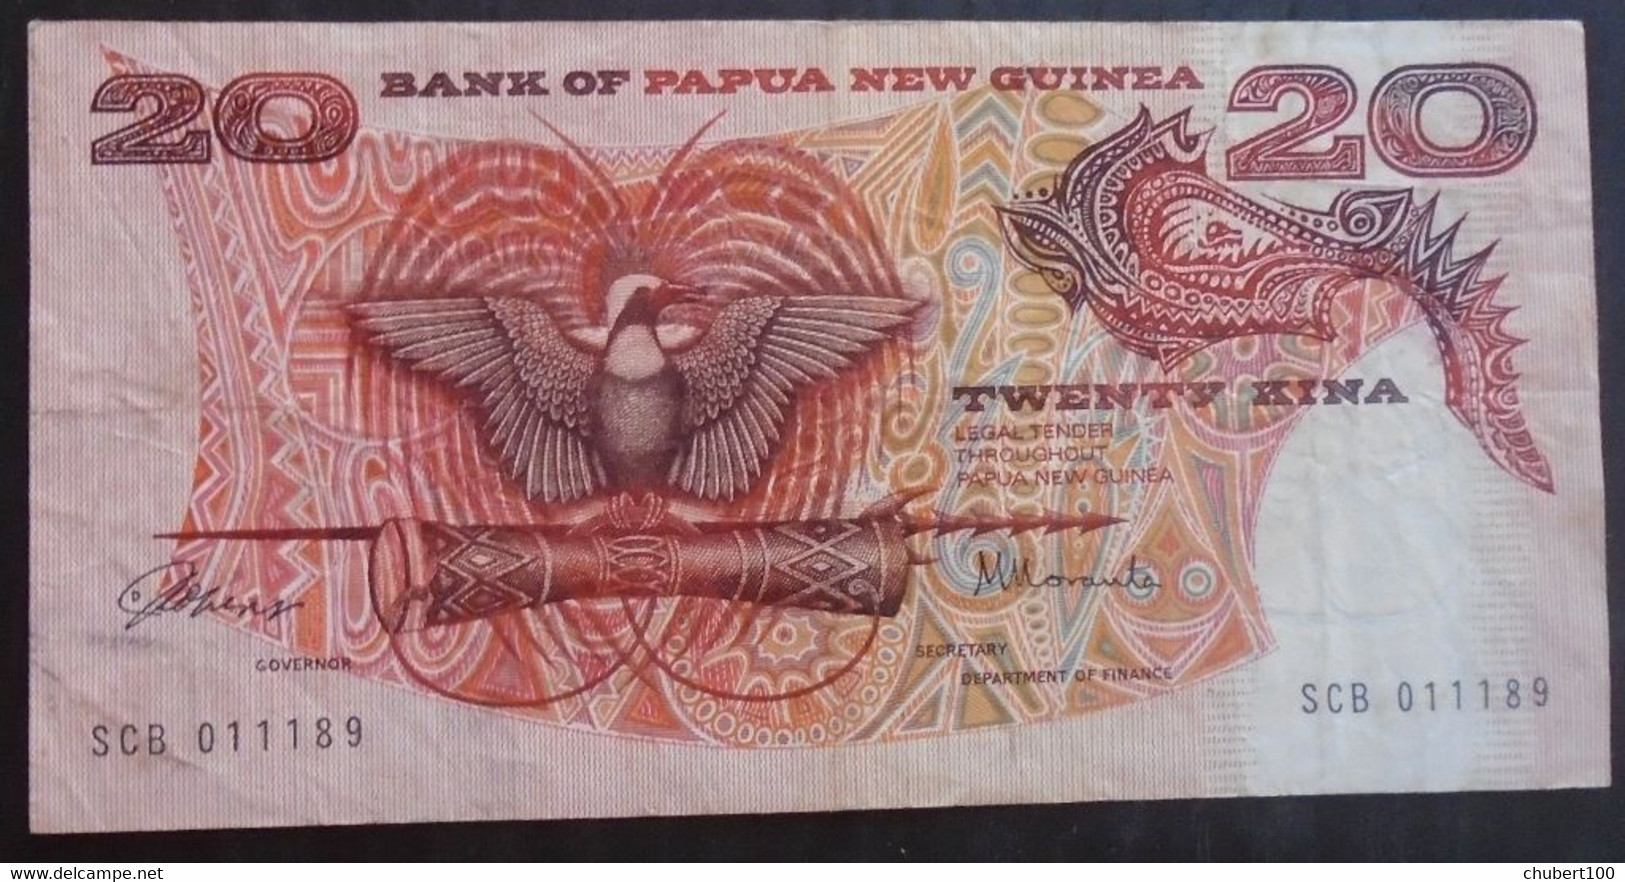 PAPUA ,  P 4,   20 Kina  , ND 1977 ,  VF , RARE: The Only One On Delcampe - Papua-Neuguinea